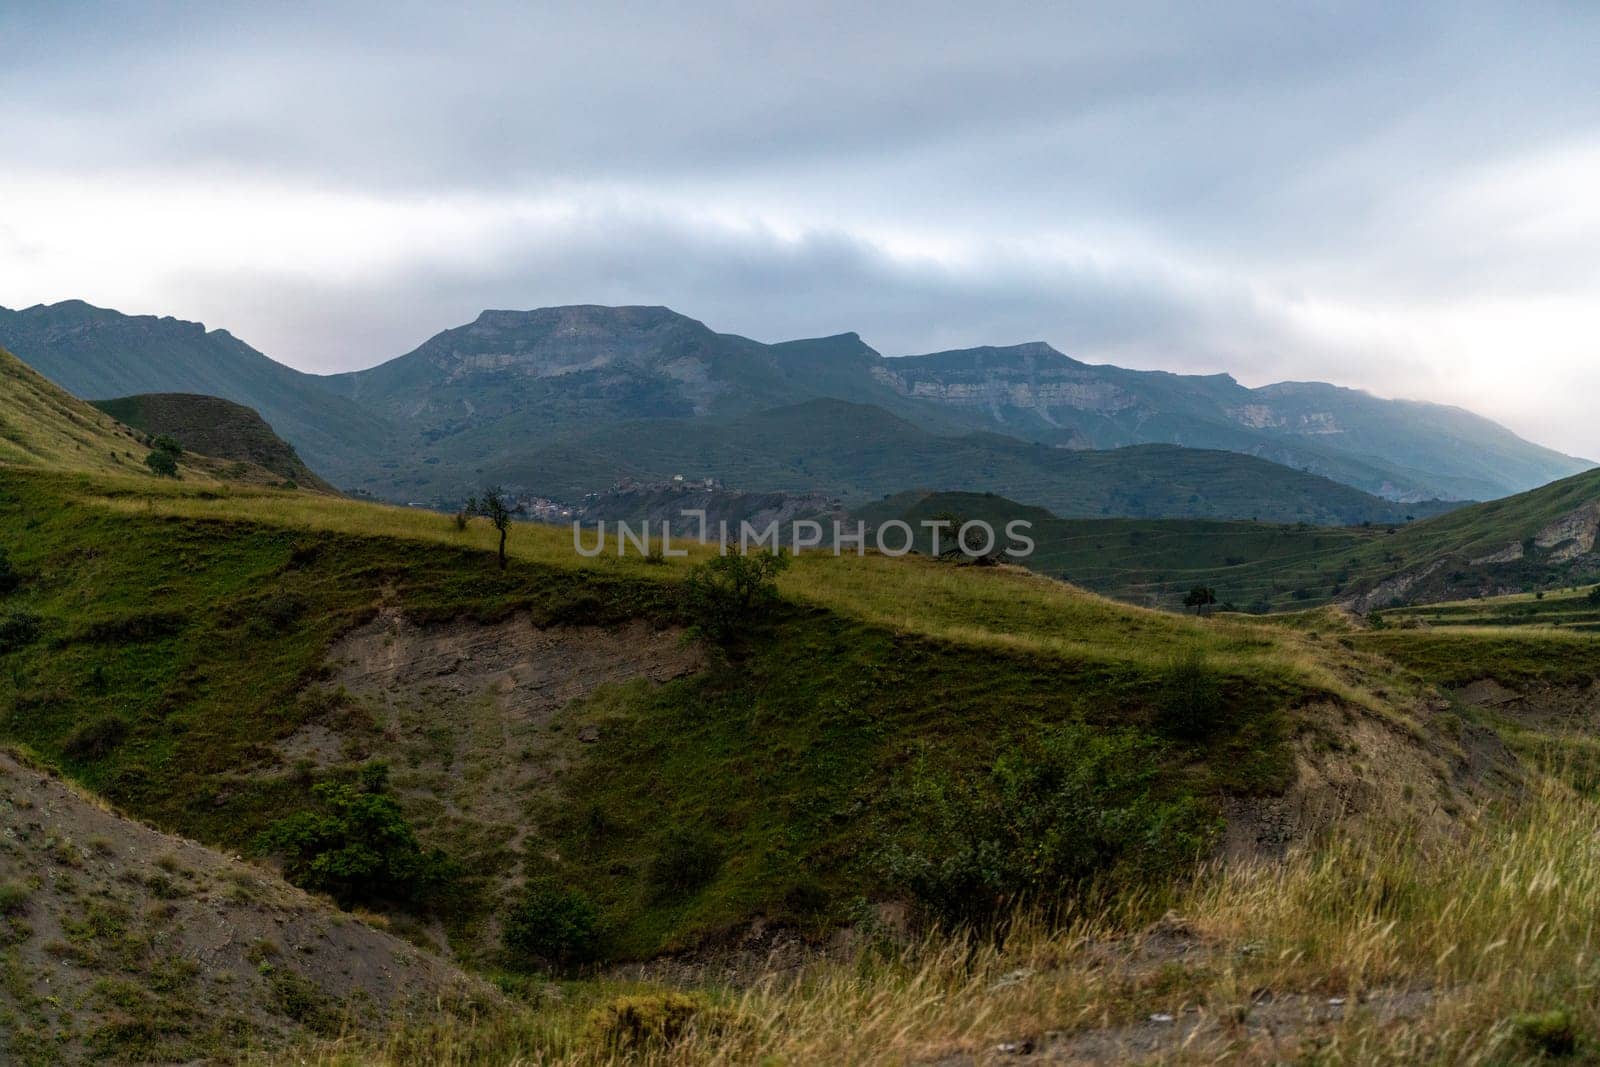 Caucasian mountain. Dagestan. Trees, rocks, mountains, view of the green mountains. Beautiful summer landscape